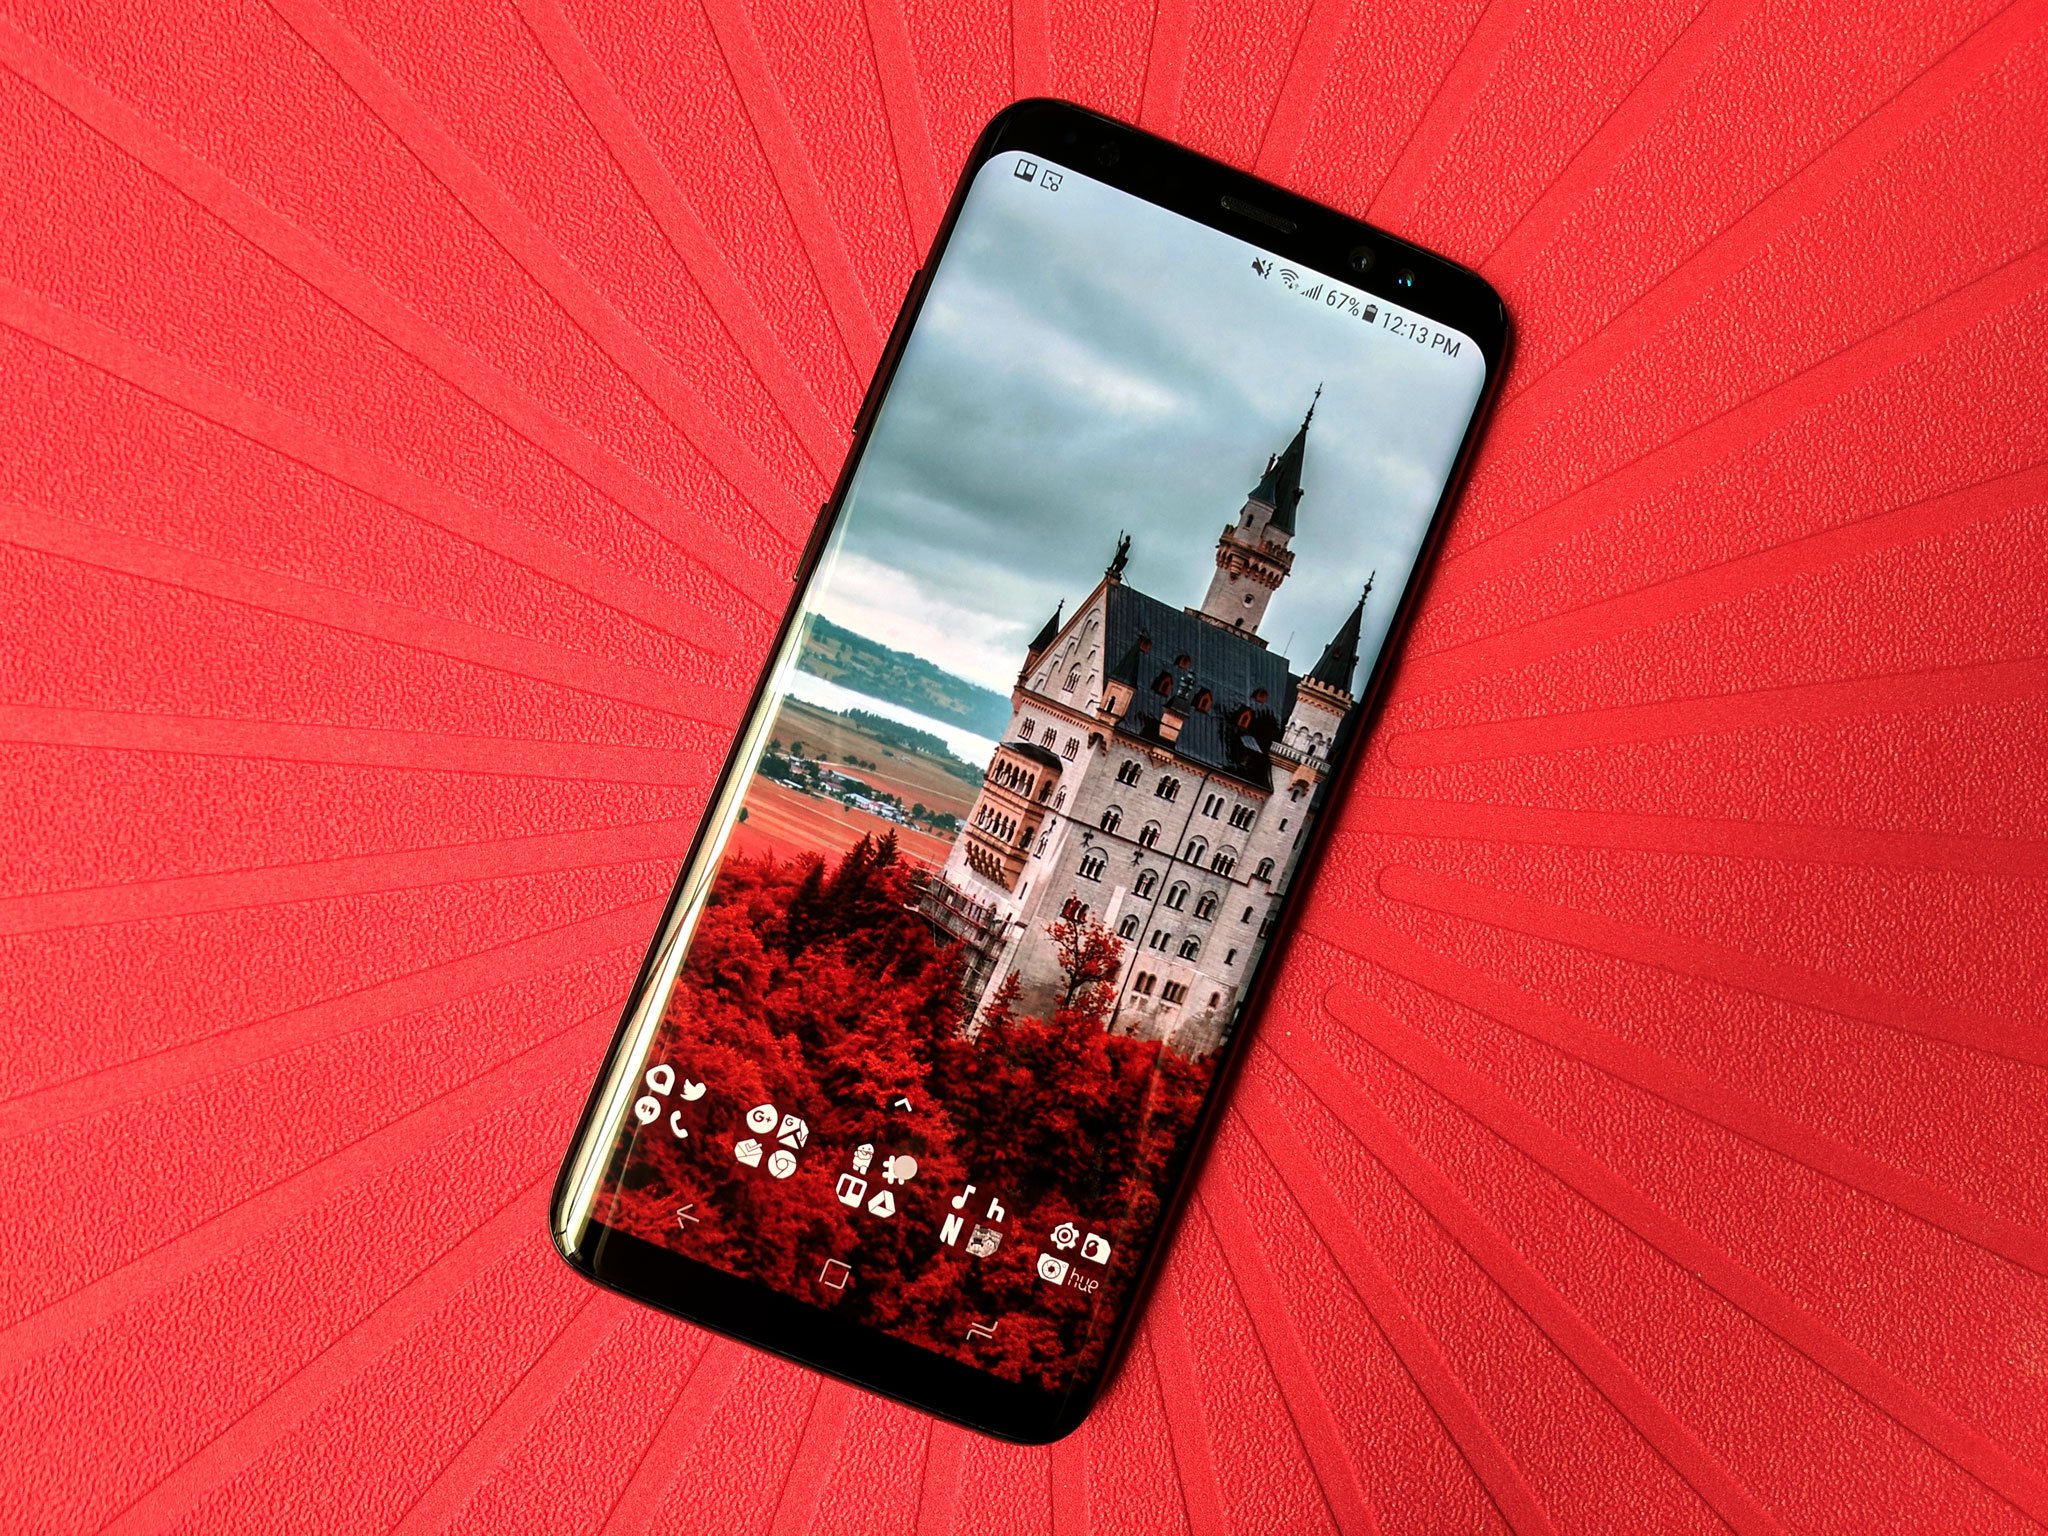 How To Find The Best Wallpapers For Android In 2020 Android Central Images, Photos, Reviews